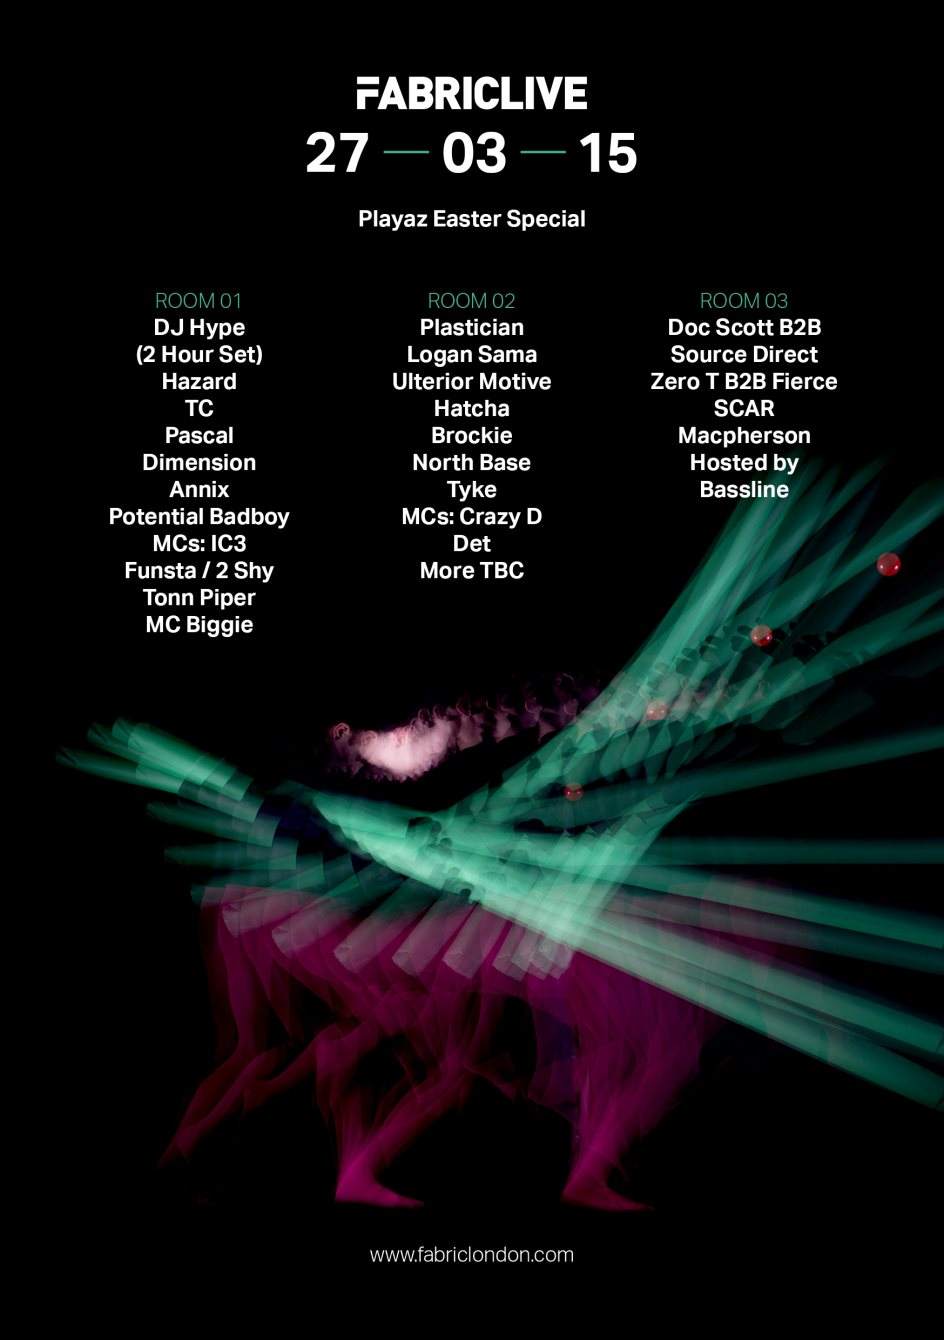 Fabriclive: Playaz Easter Special - Página frontal